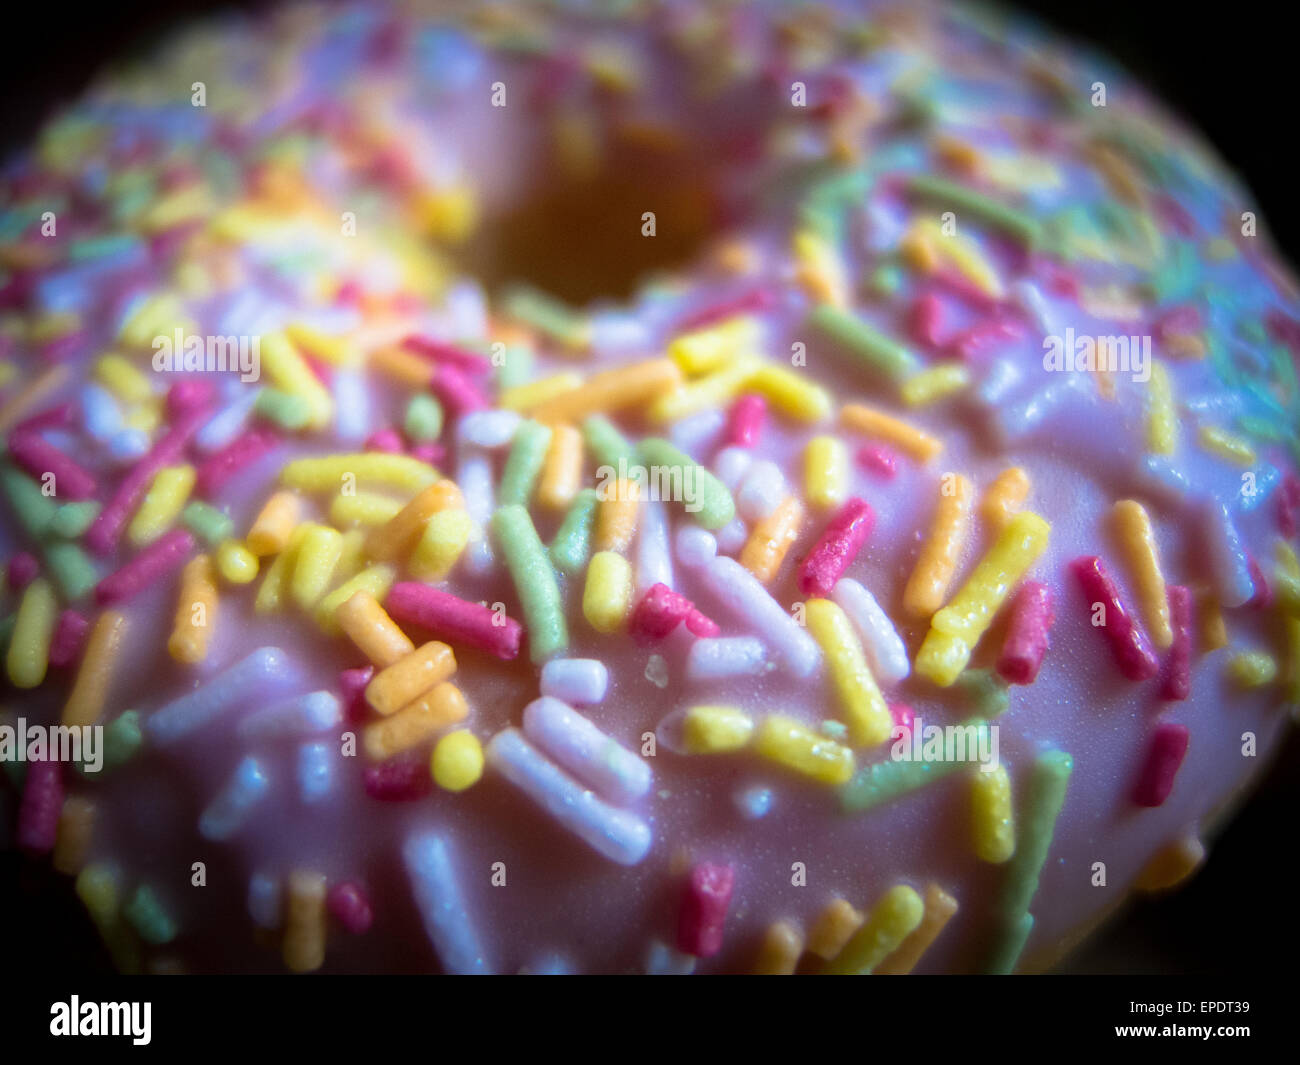 Closeup on a strawberry doughnut with pink icing and multi coloured sprinkles Stock Photo